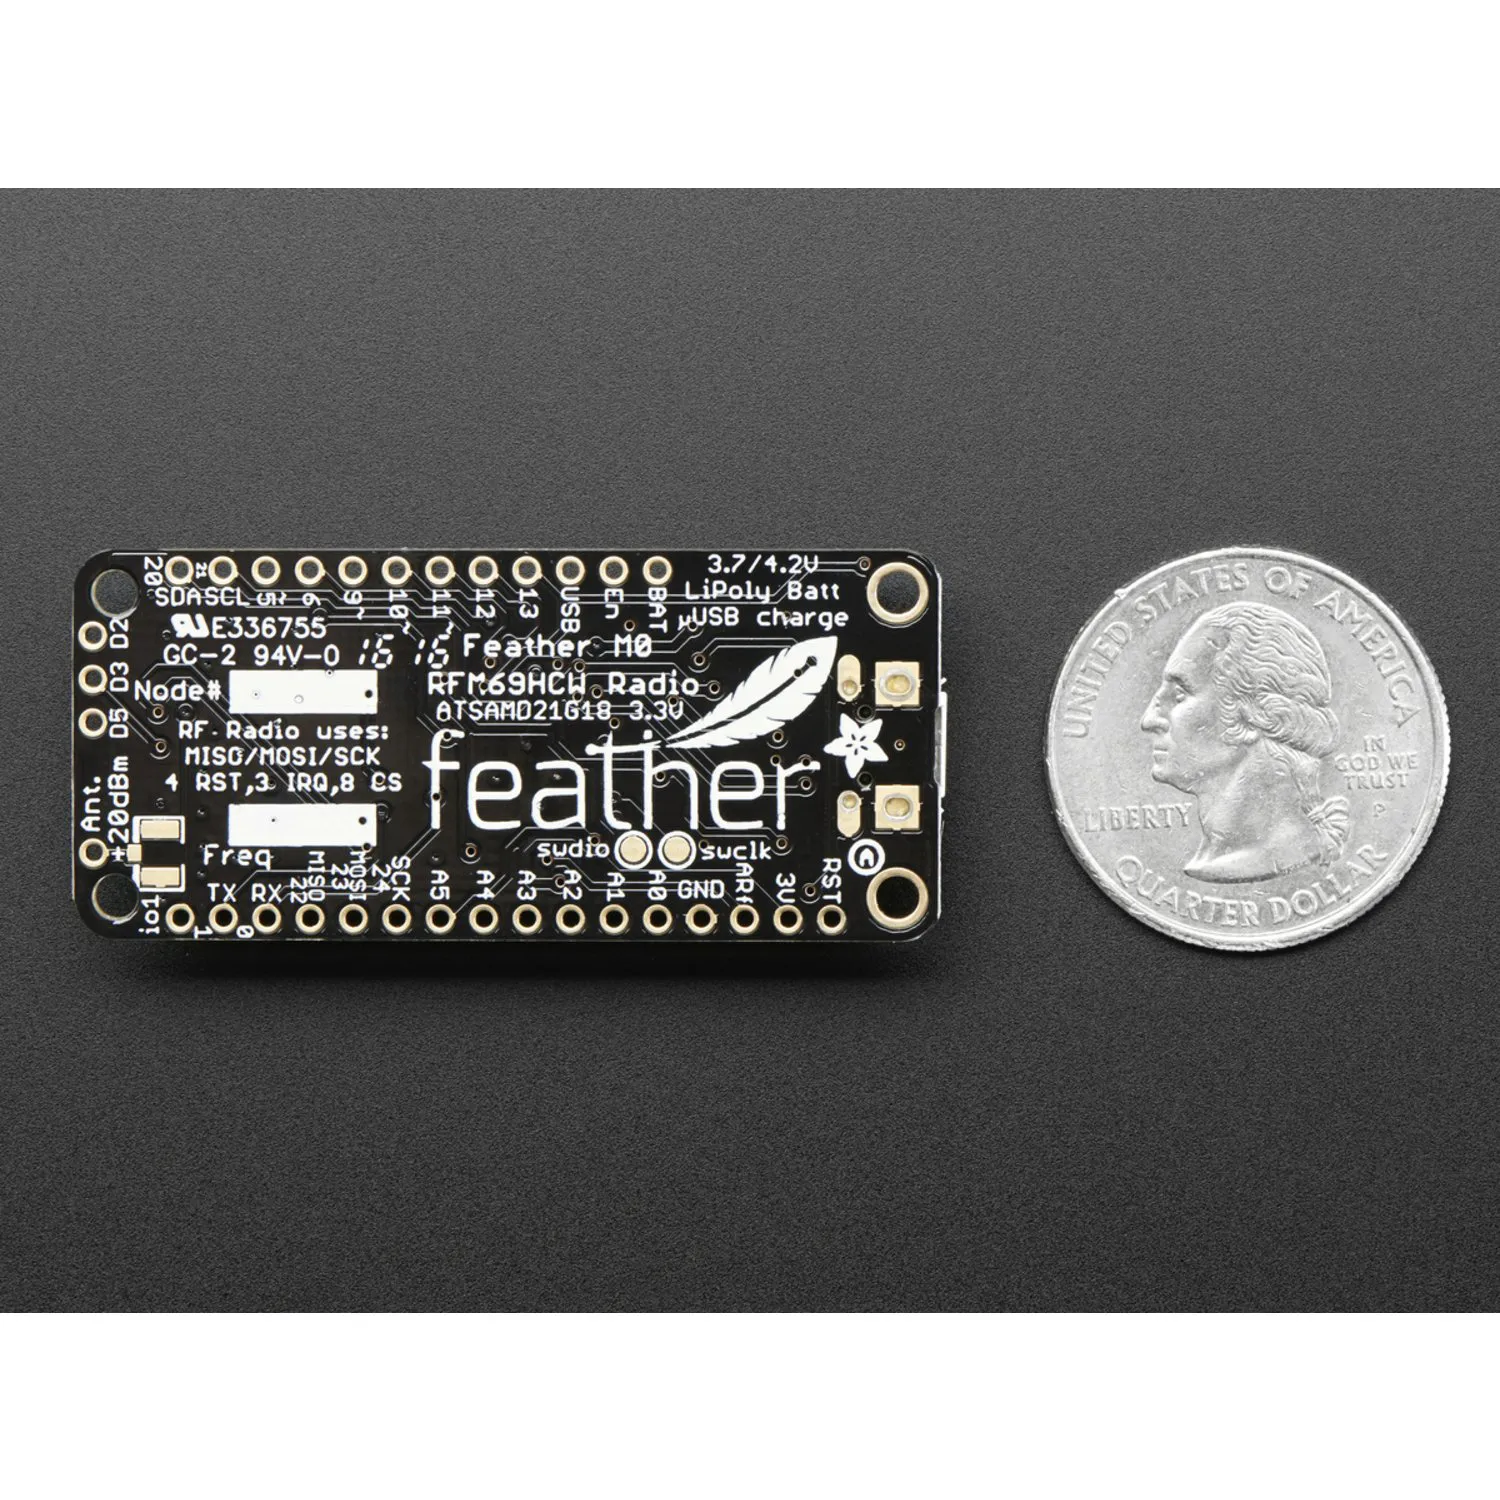 Photo of Adafruit Feather M0 RFM69HCW Packet Radio - 868 or 915 MHz